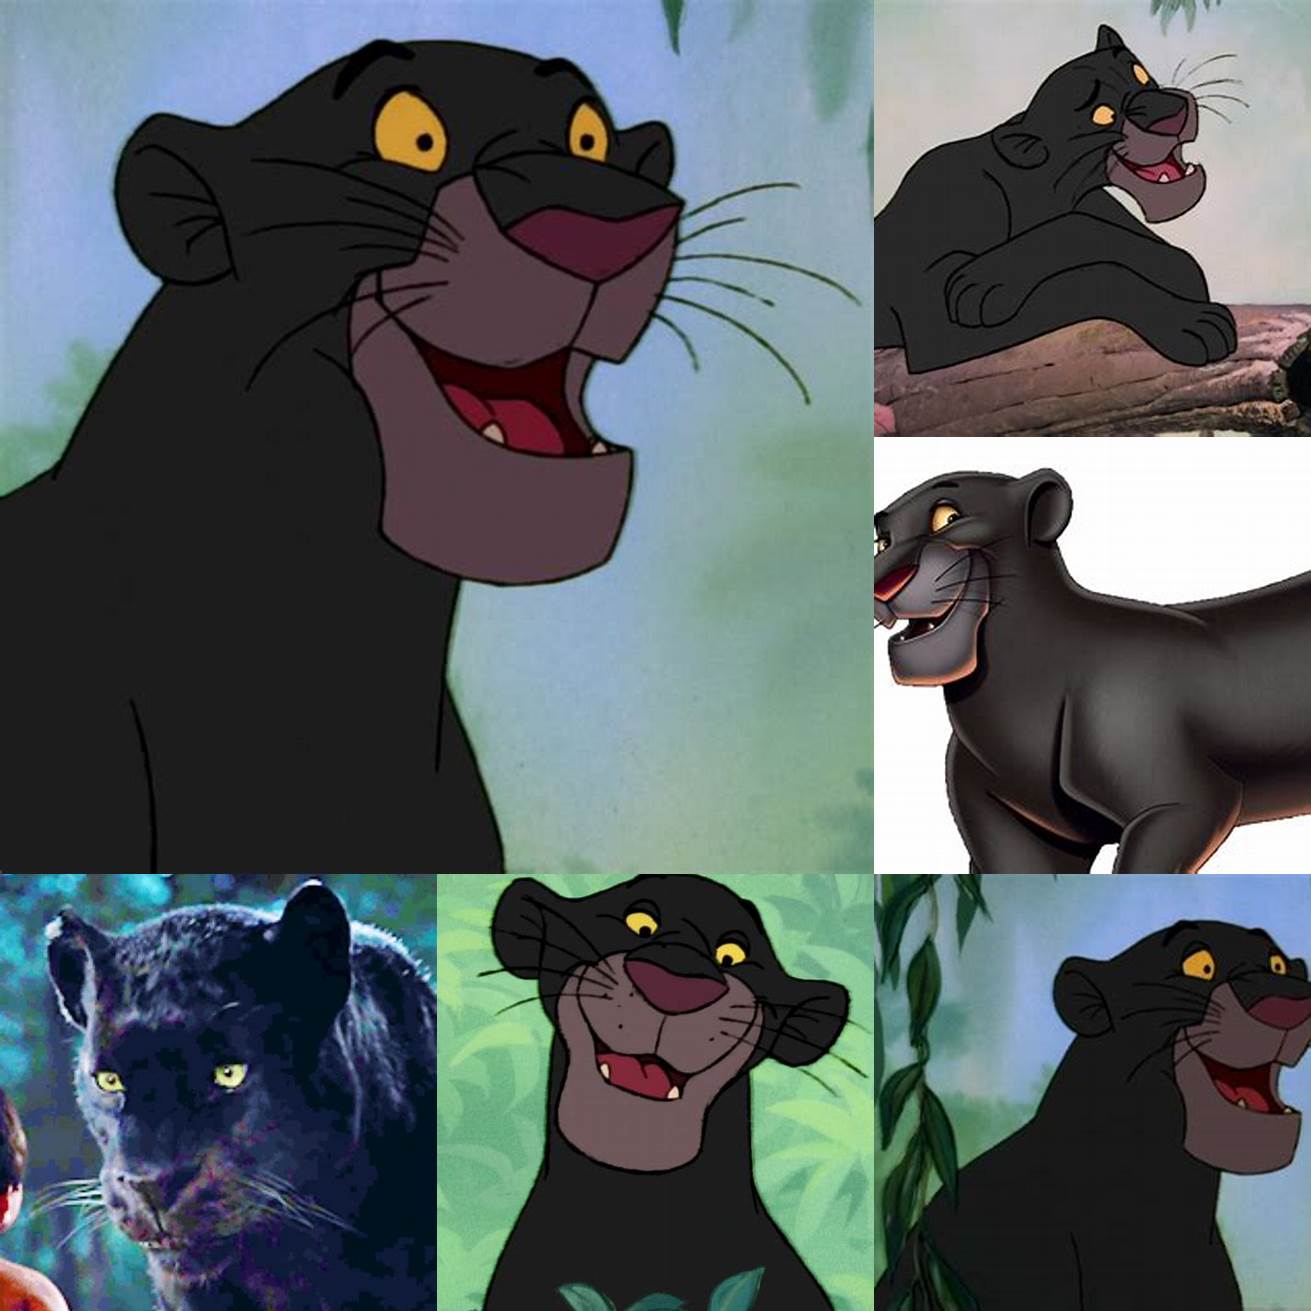 Bagheera from The Jungle Book